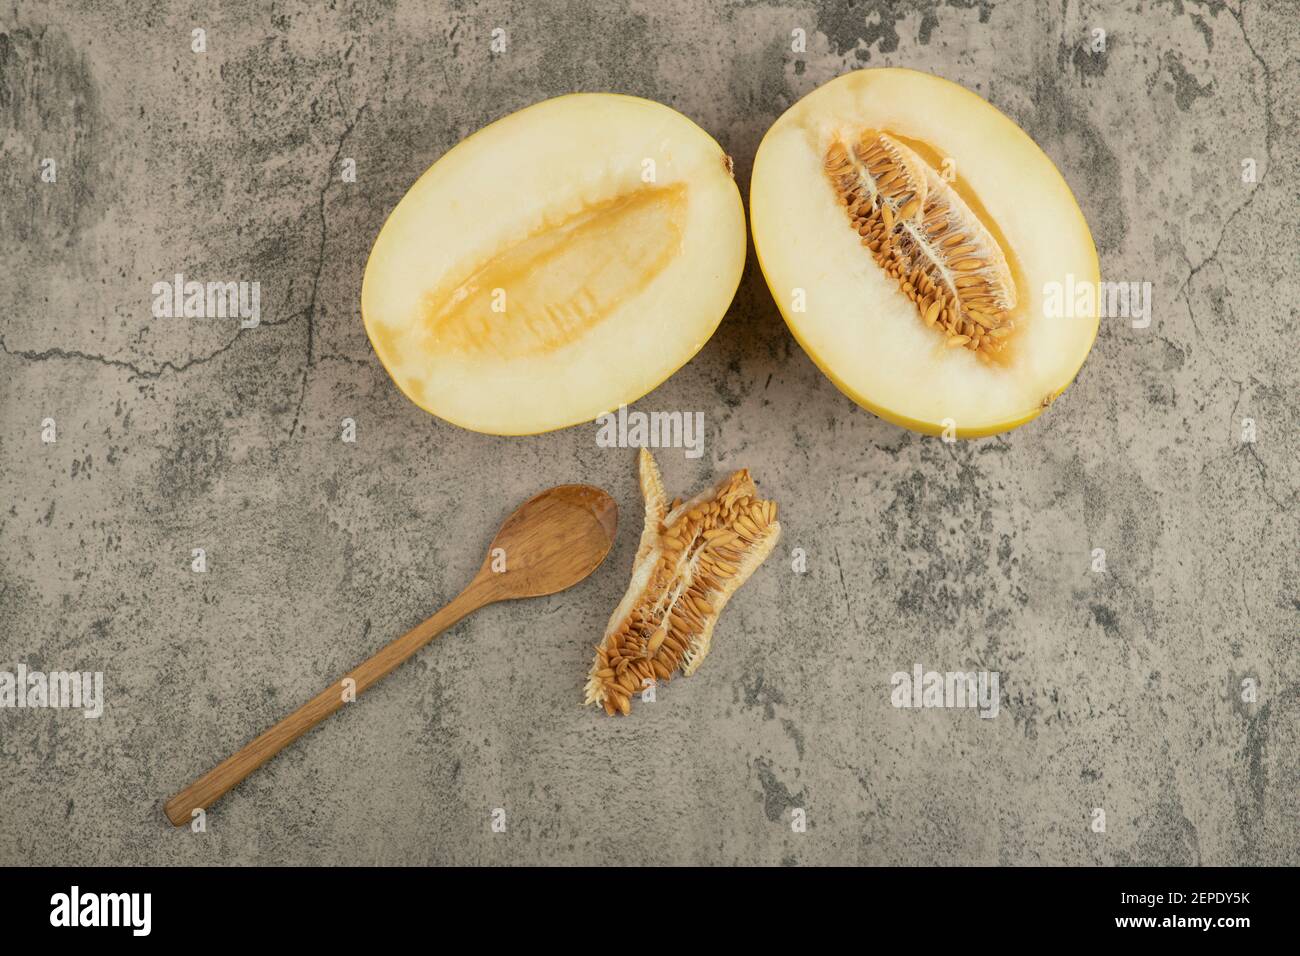 Halved delicious yellow melons on marble surface with wooden spoon aside Stock Photo